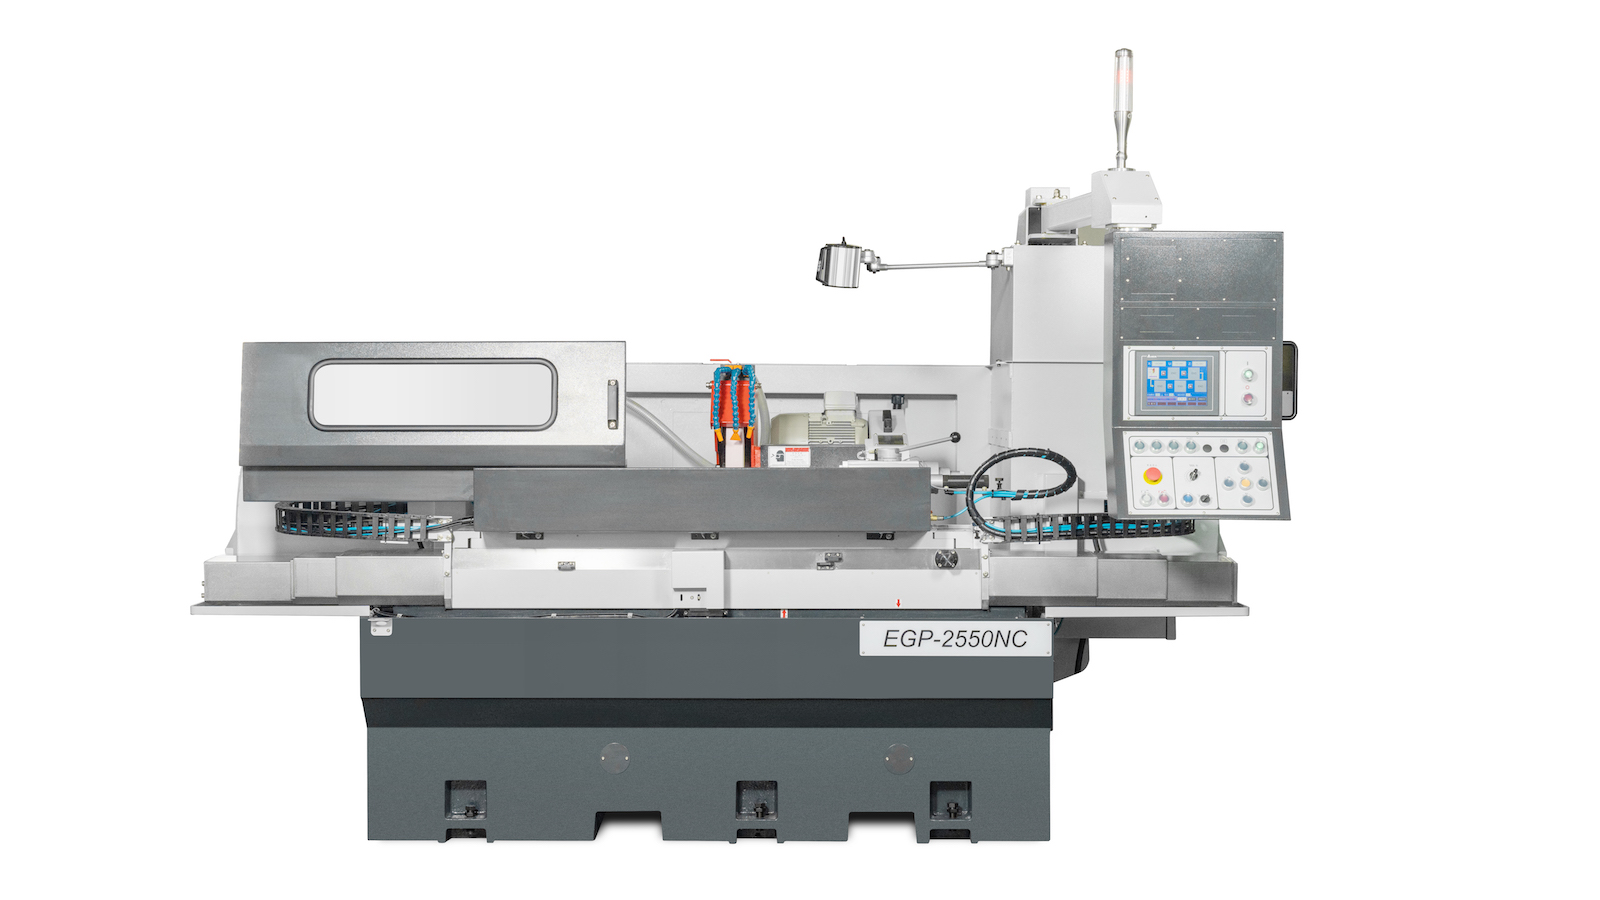 Suppliers of High Precision Grinding Equipment